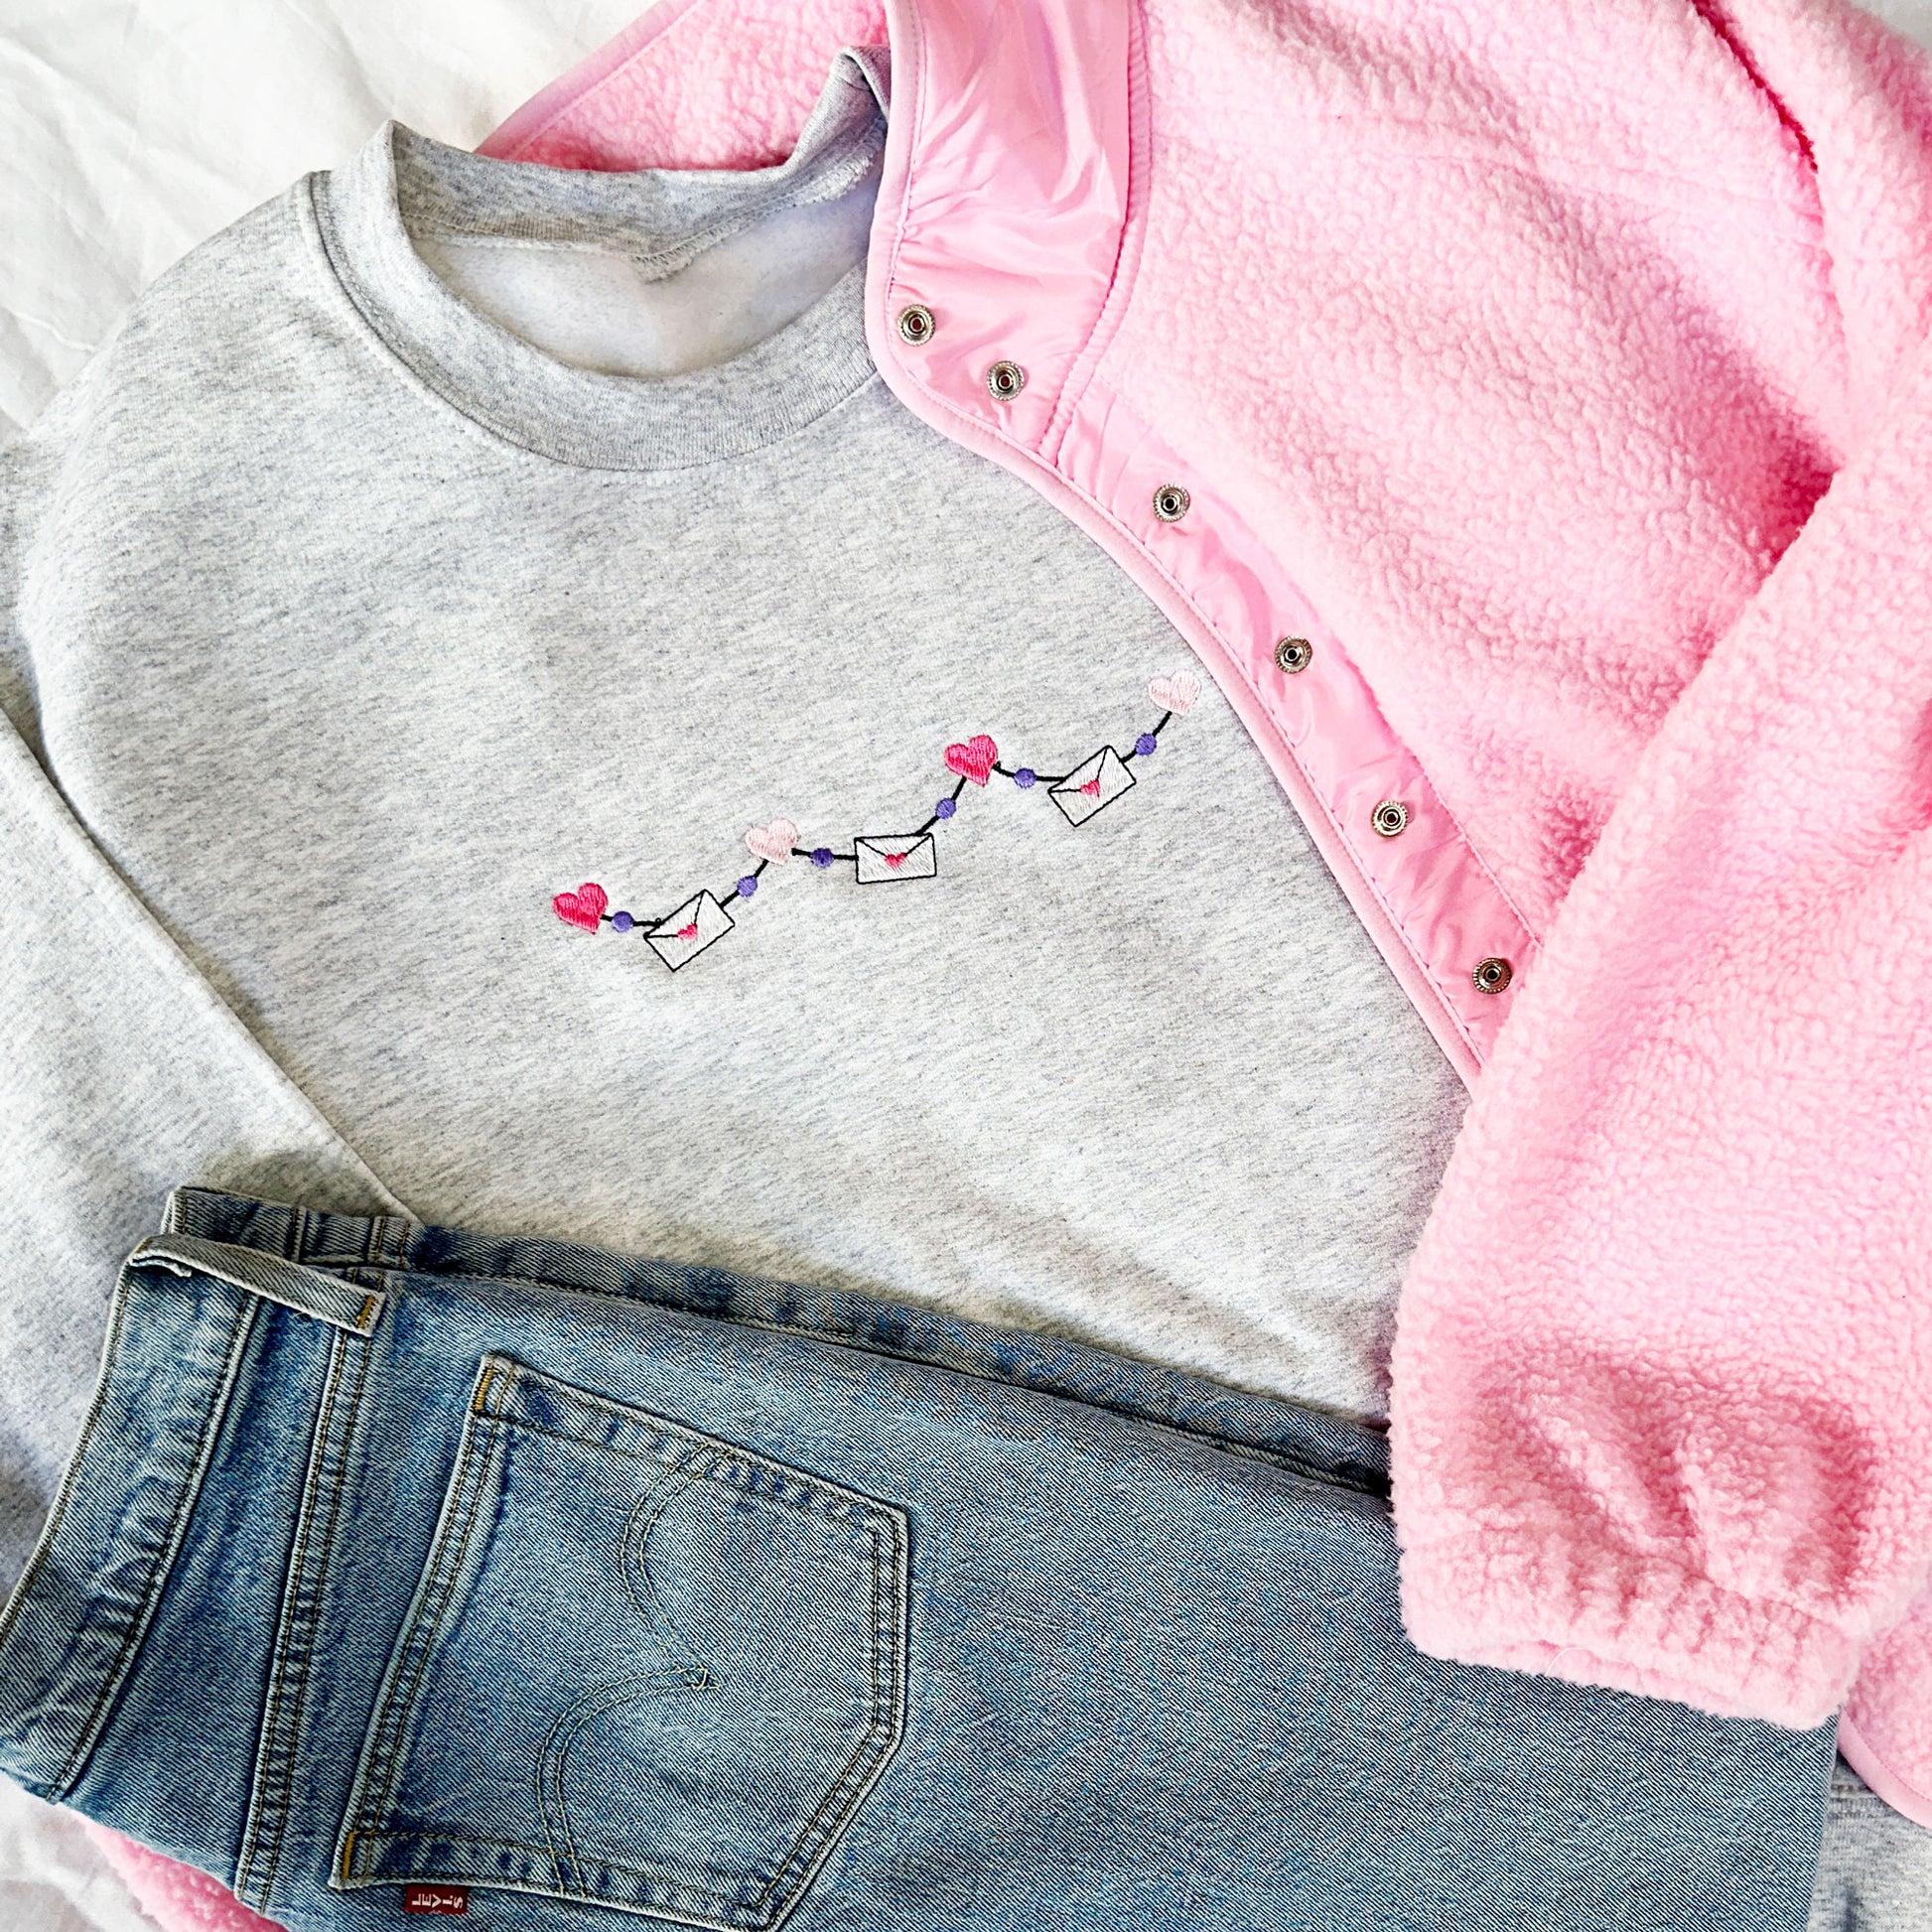 jeans and a bright pink fleece jacket paired with a light gray sweatshirt with a valentine's themed garland design embroidered on the center chest featuring mini hearts and mini envelopes